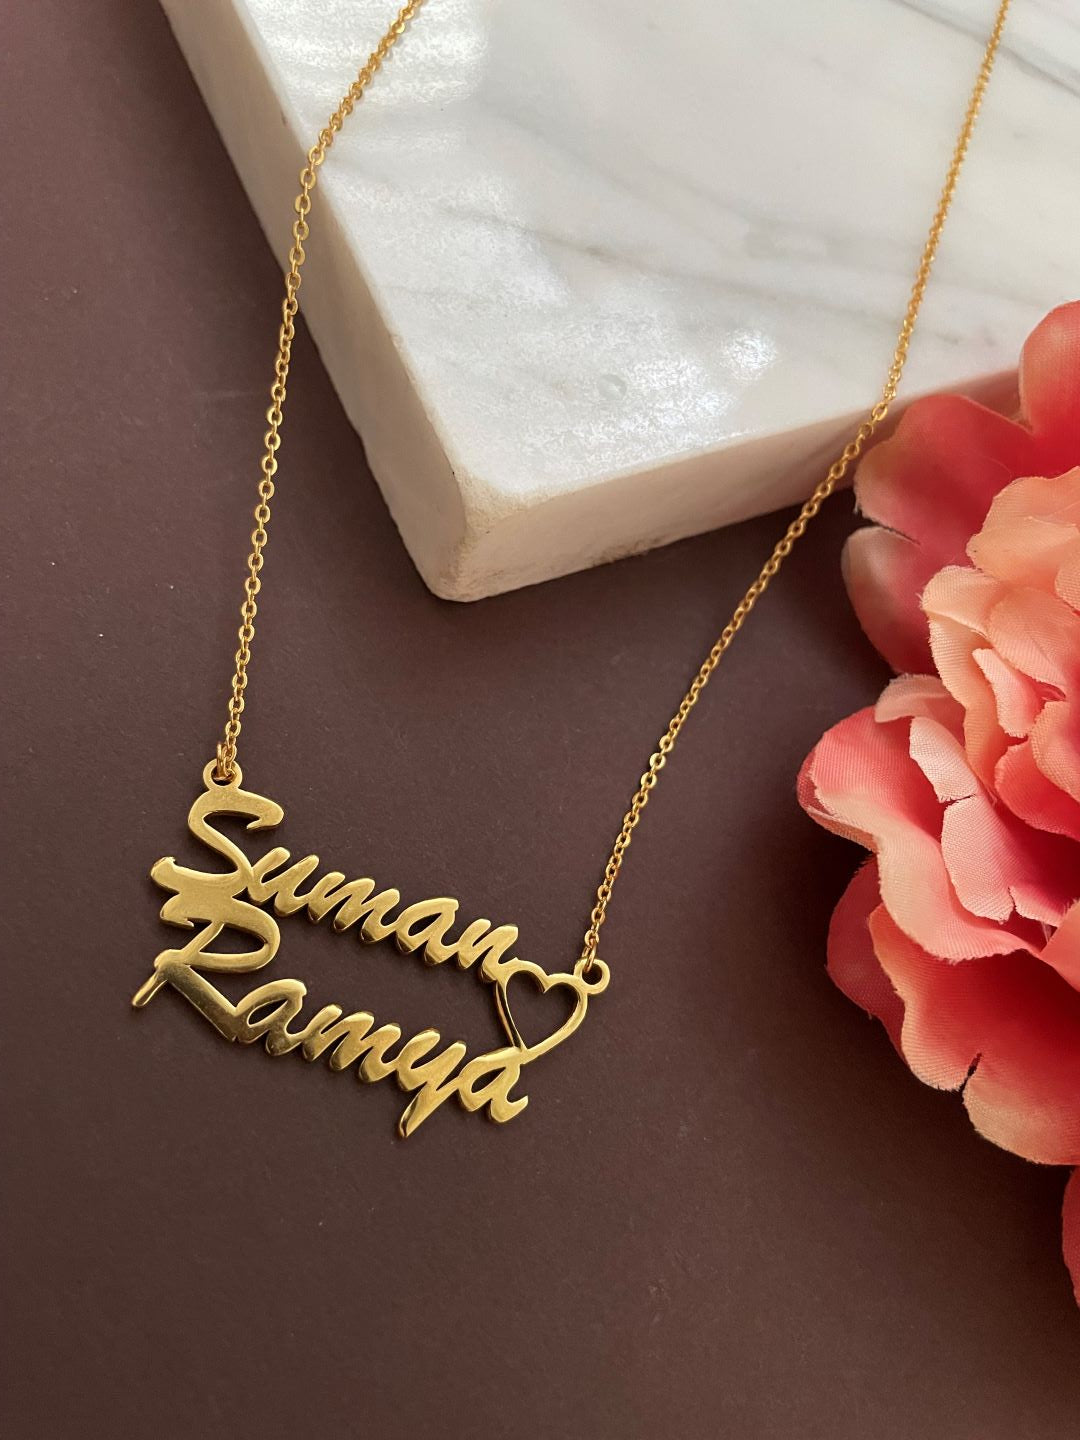 2 Personalized Name Pendent With A Heart In Gold Necklace Chain 